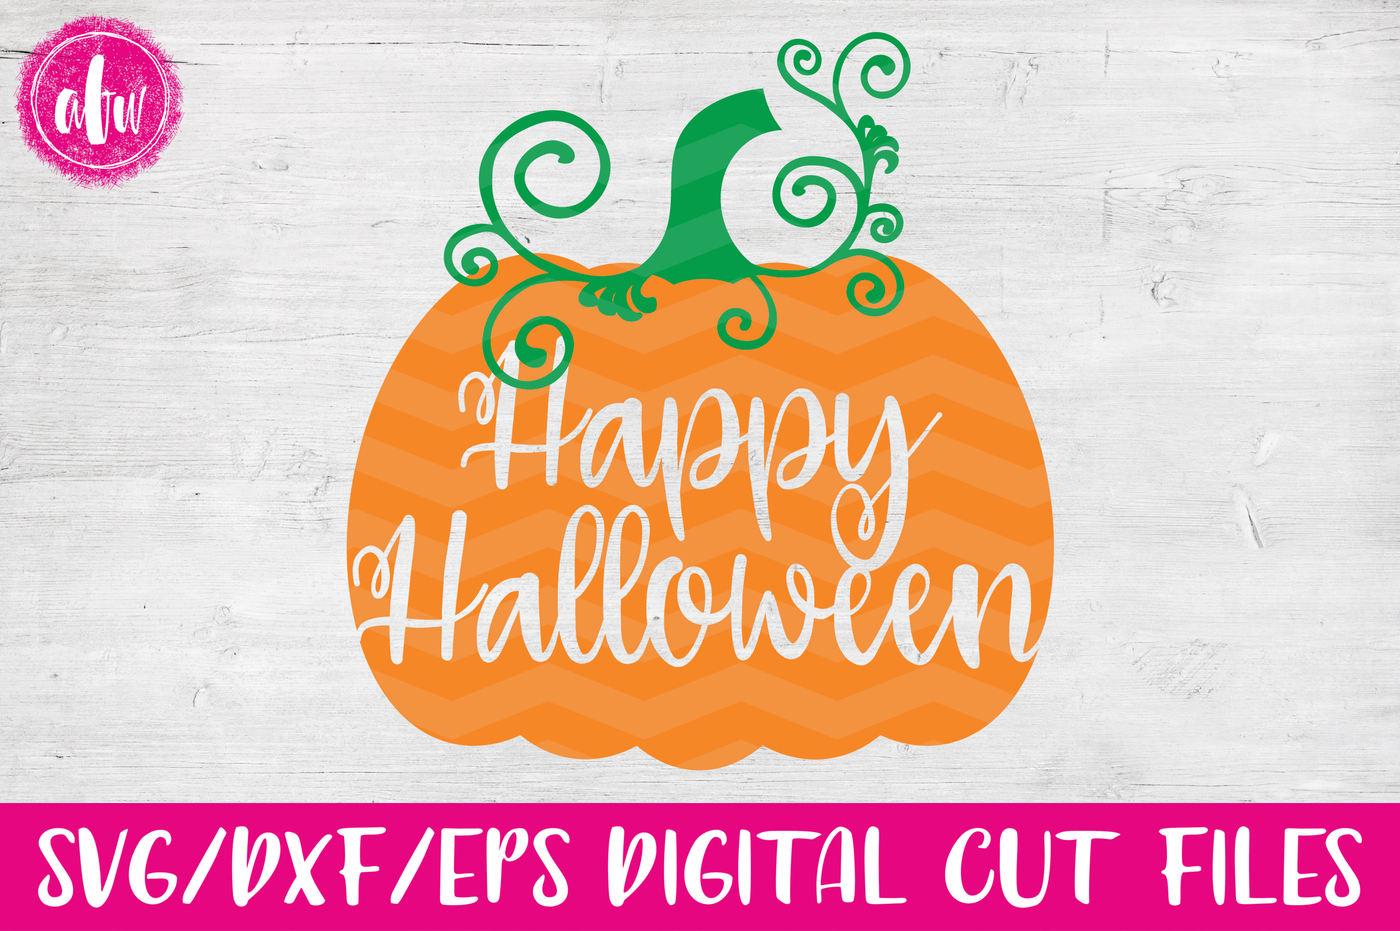 Download Happy Halloween Pumpkin - SVG, DXF, EPS Cut File By AFW ...